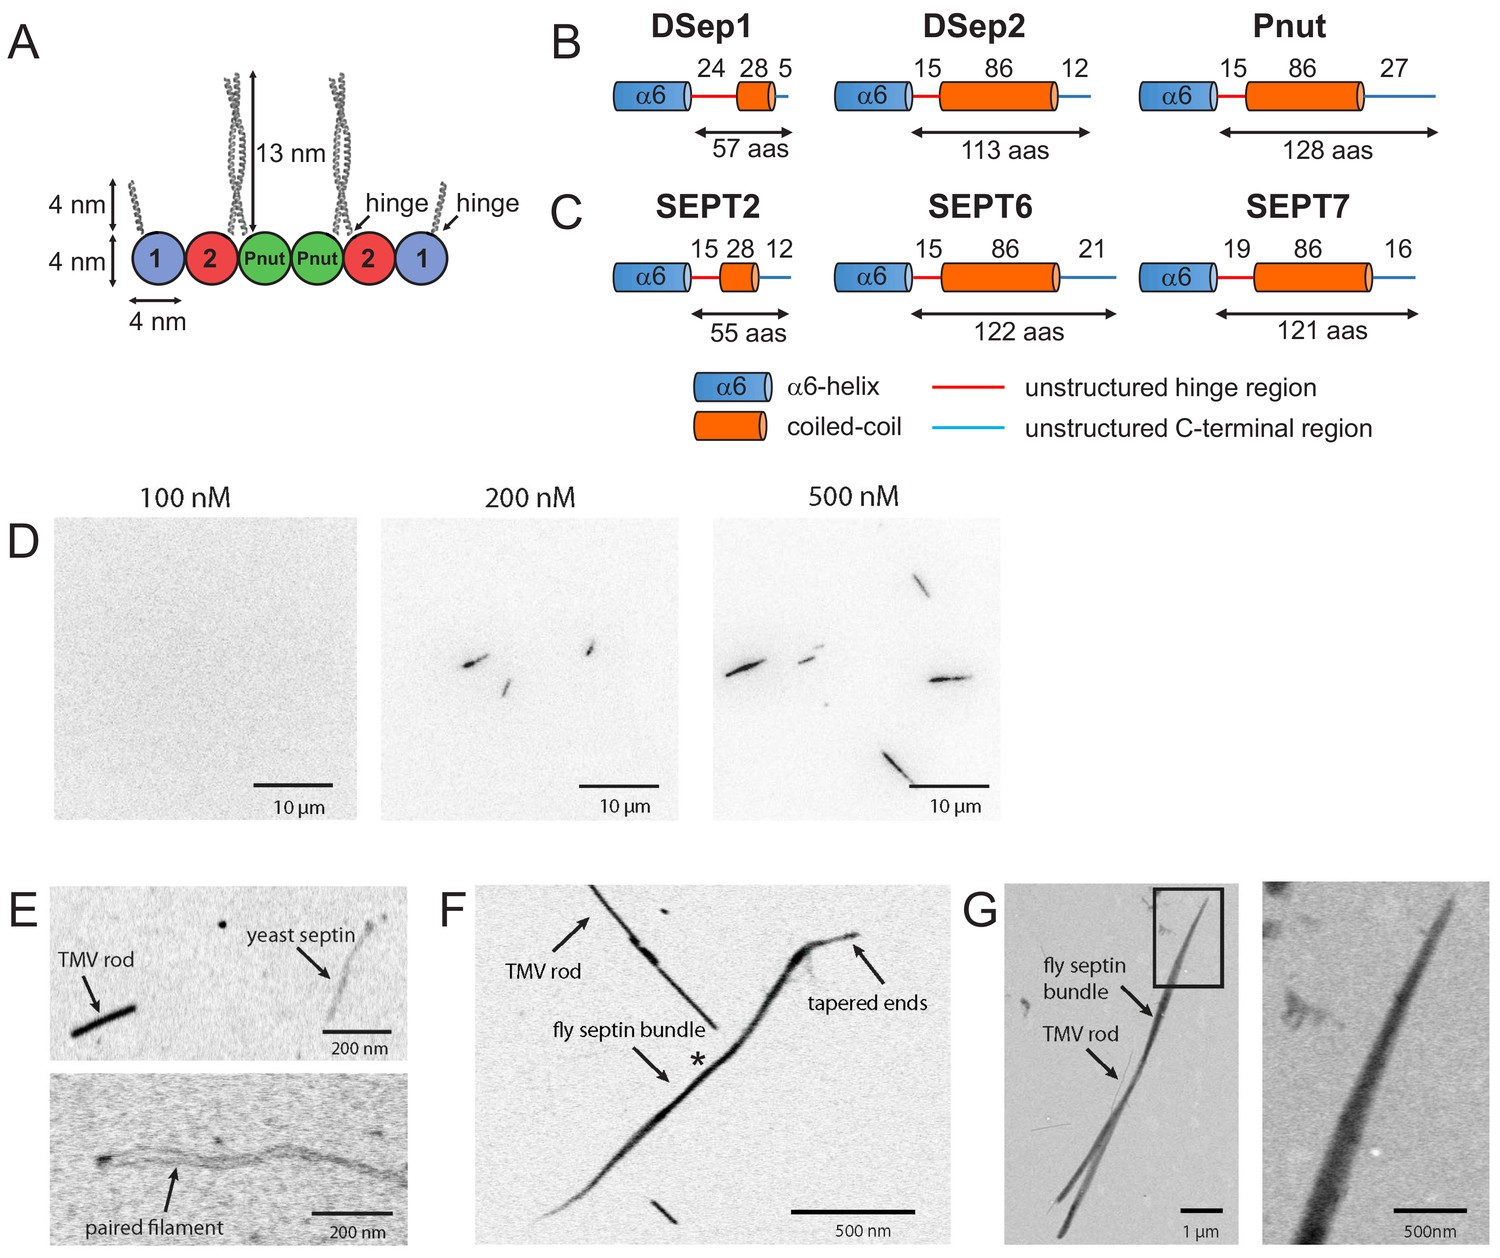 Mutant septins evade exclusion by quality control if assembled into